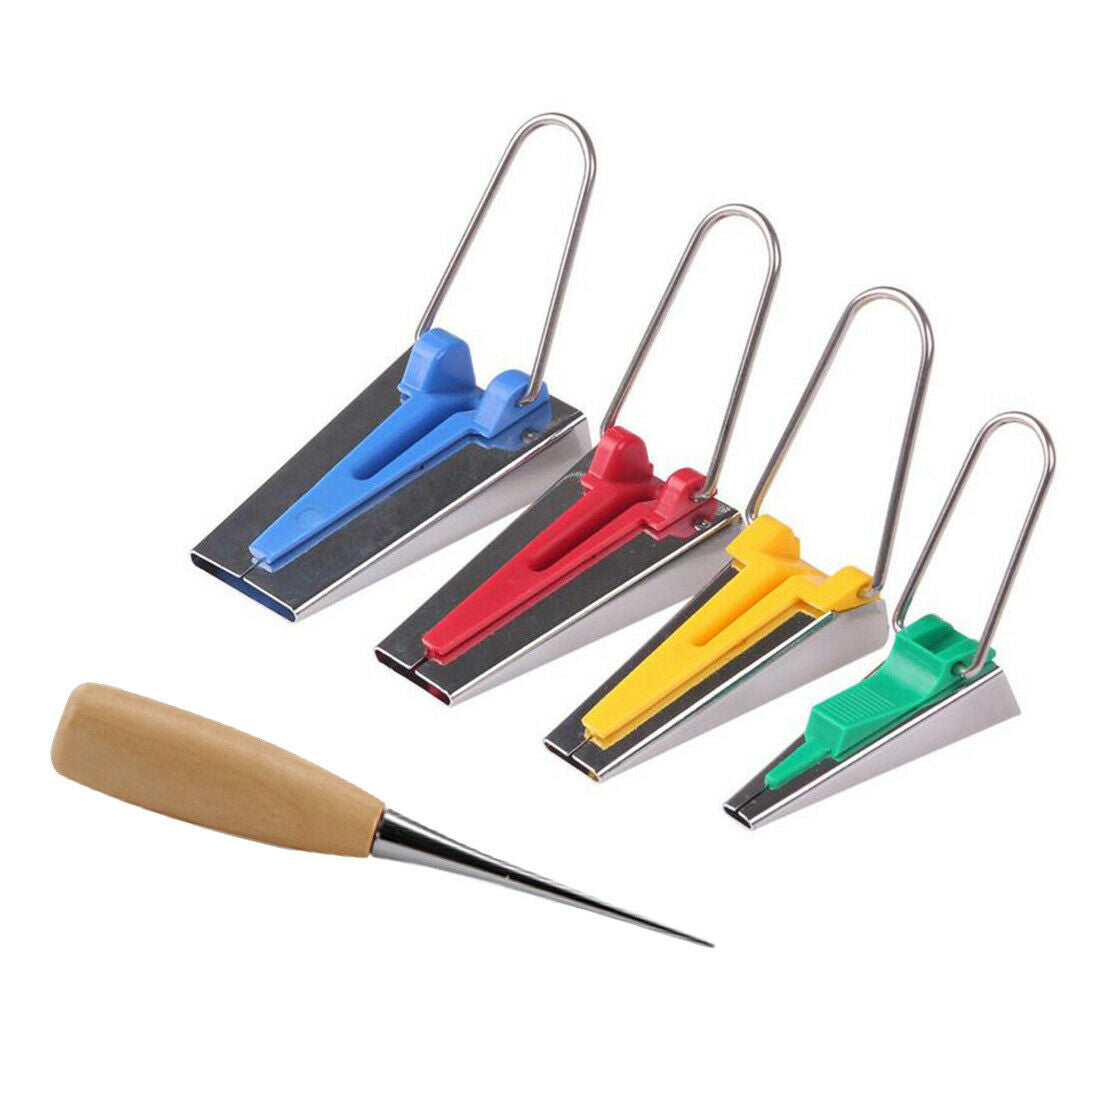 5pcs/ Set Bias Tape Maker Kit For Sewing Quilting Awl and Binder Foot Case Tools